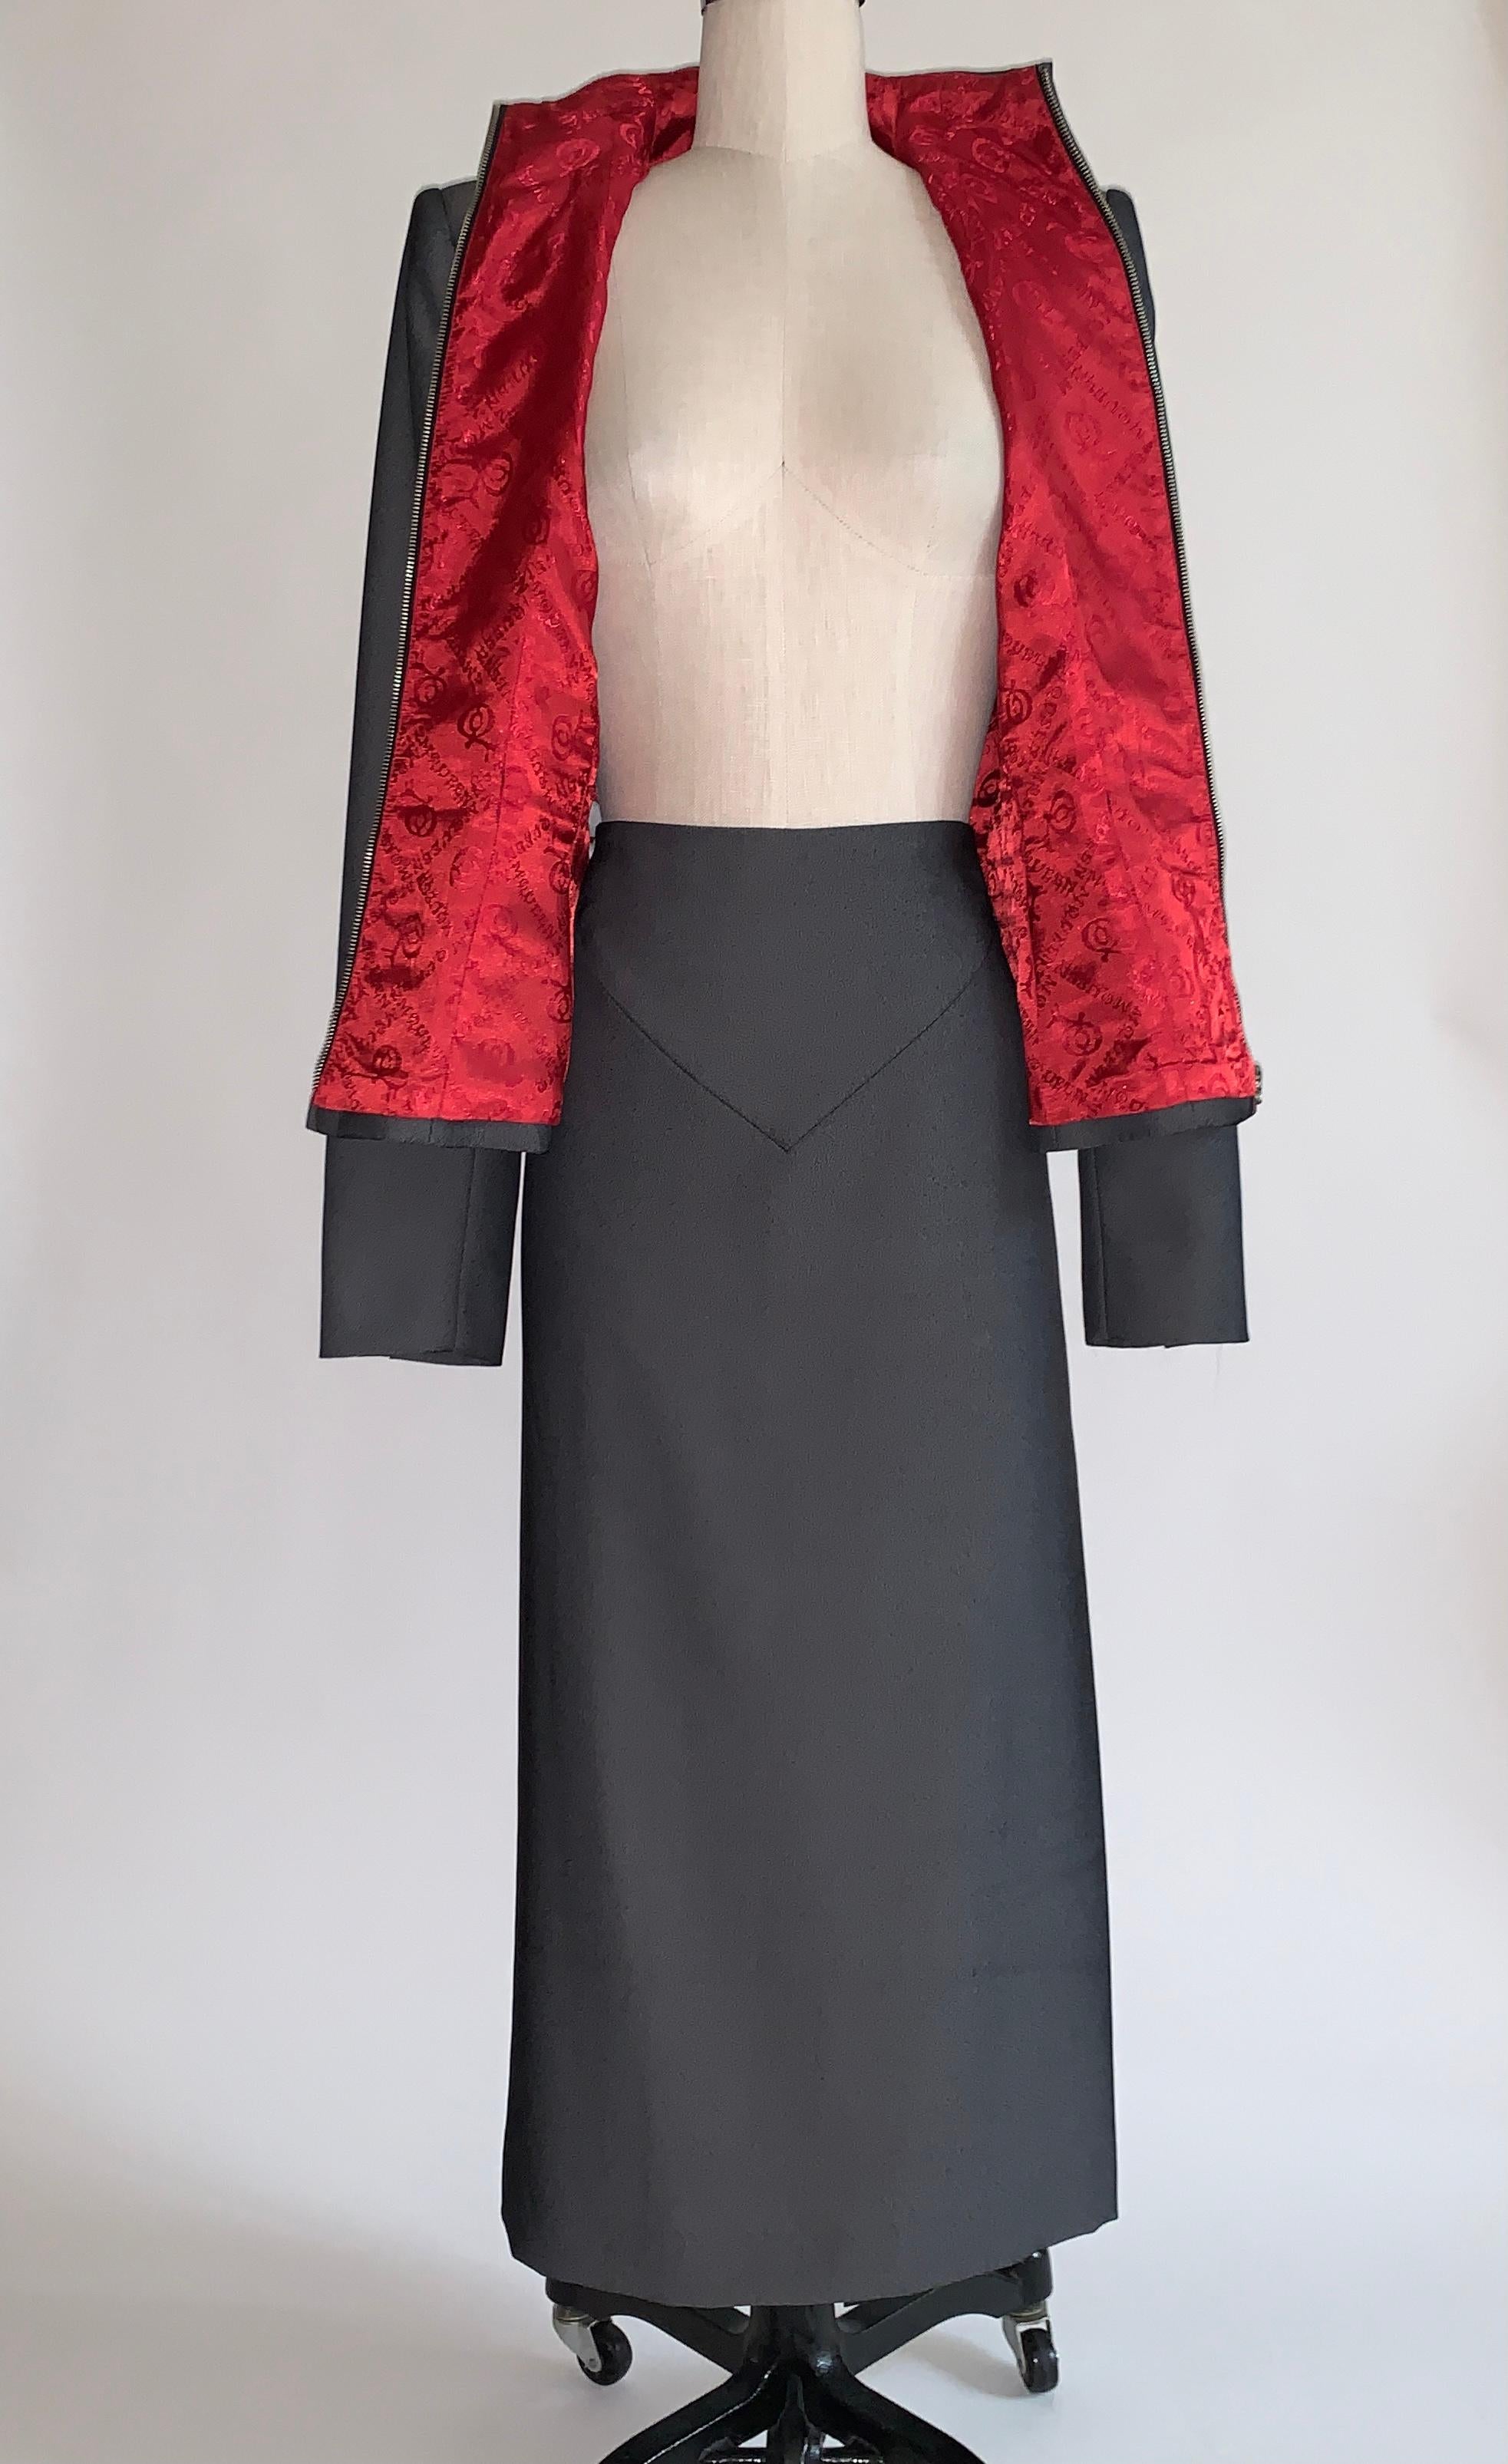 Alexander Mcqueen 1998 Joan Skirt Suit with Zippered Jacket and Logo Red Lining In Good Condition For Sale In San Francisco, CA